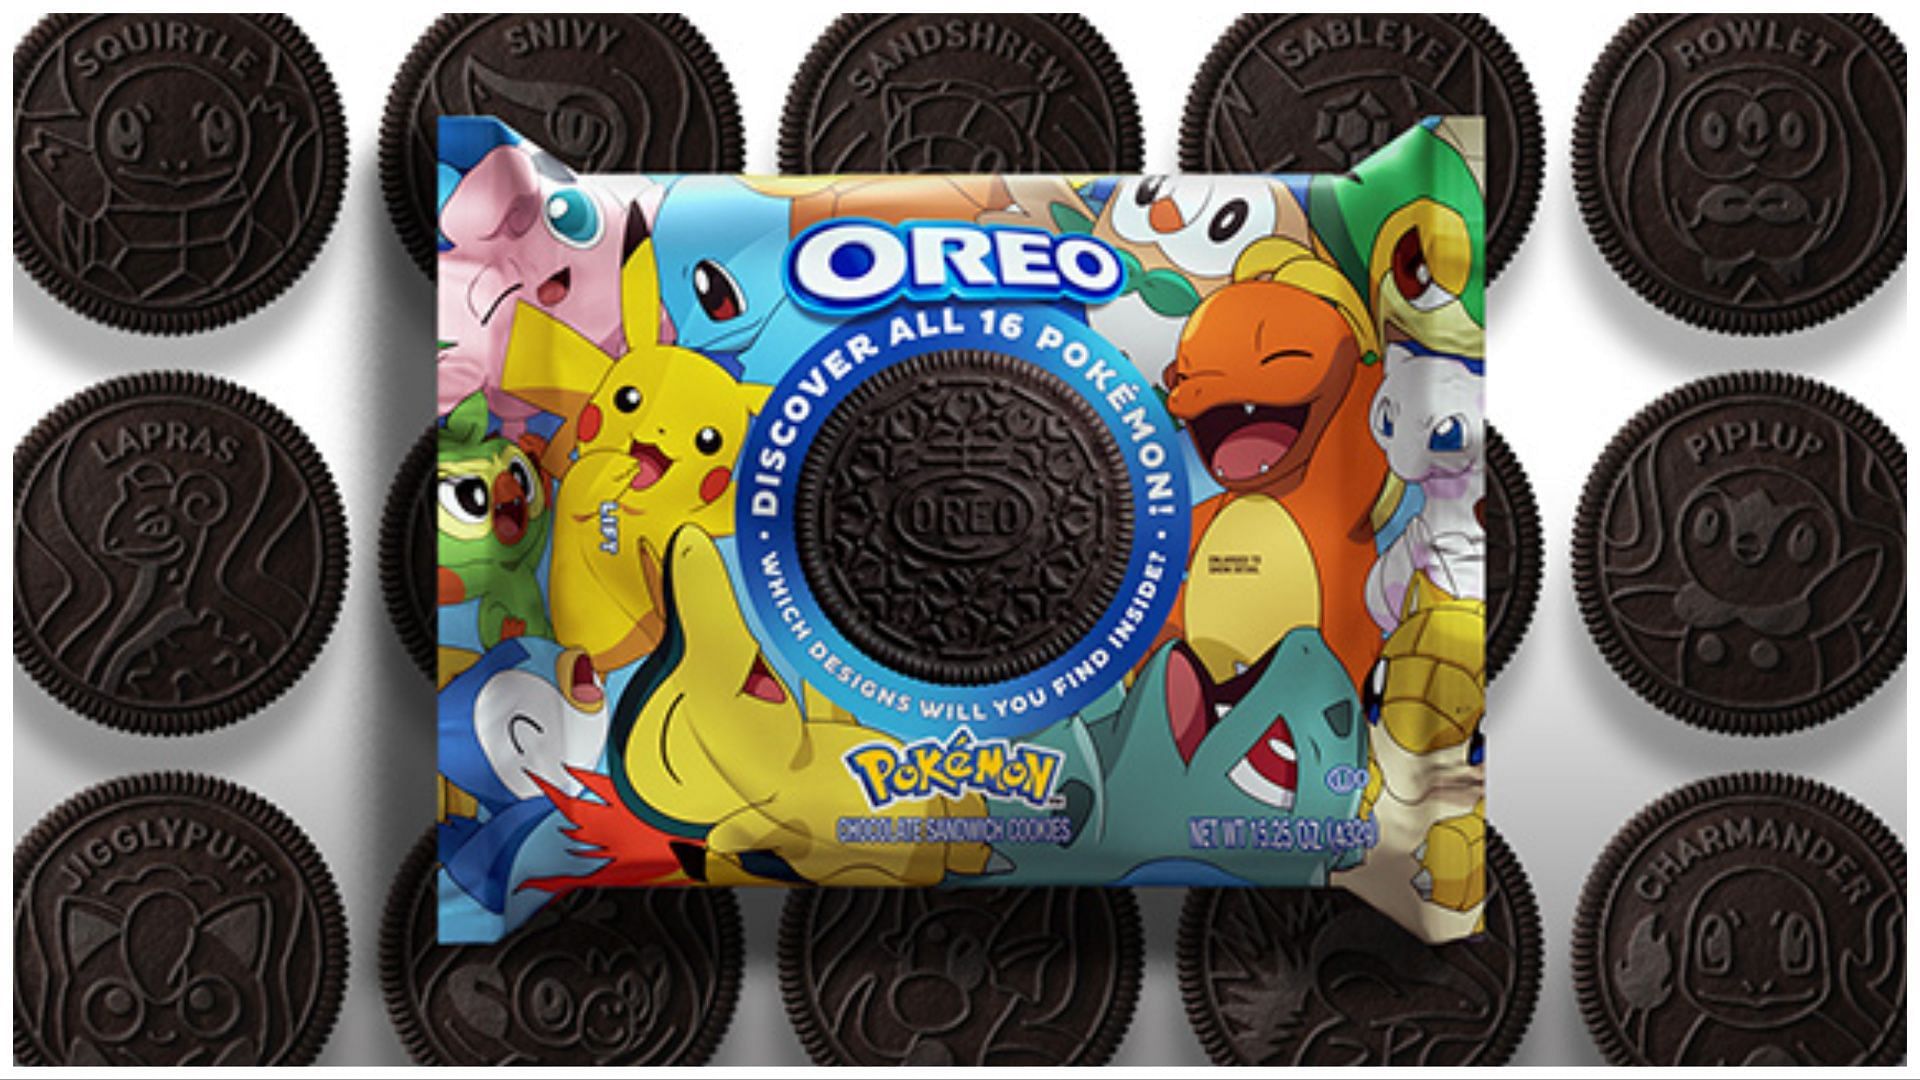 How to Collect All of the Super Mario Oreo Cookies